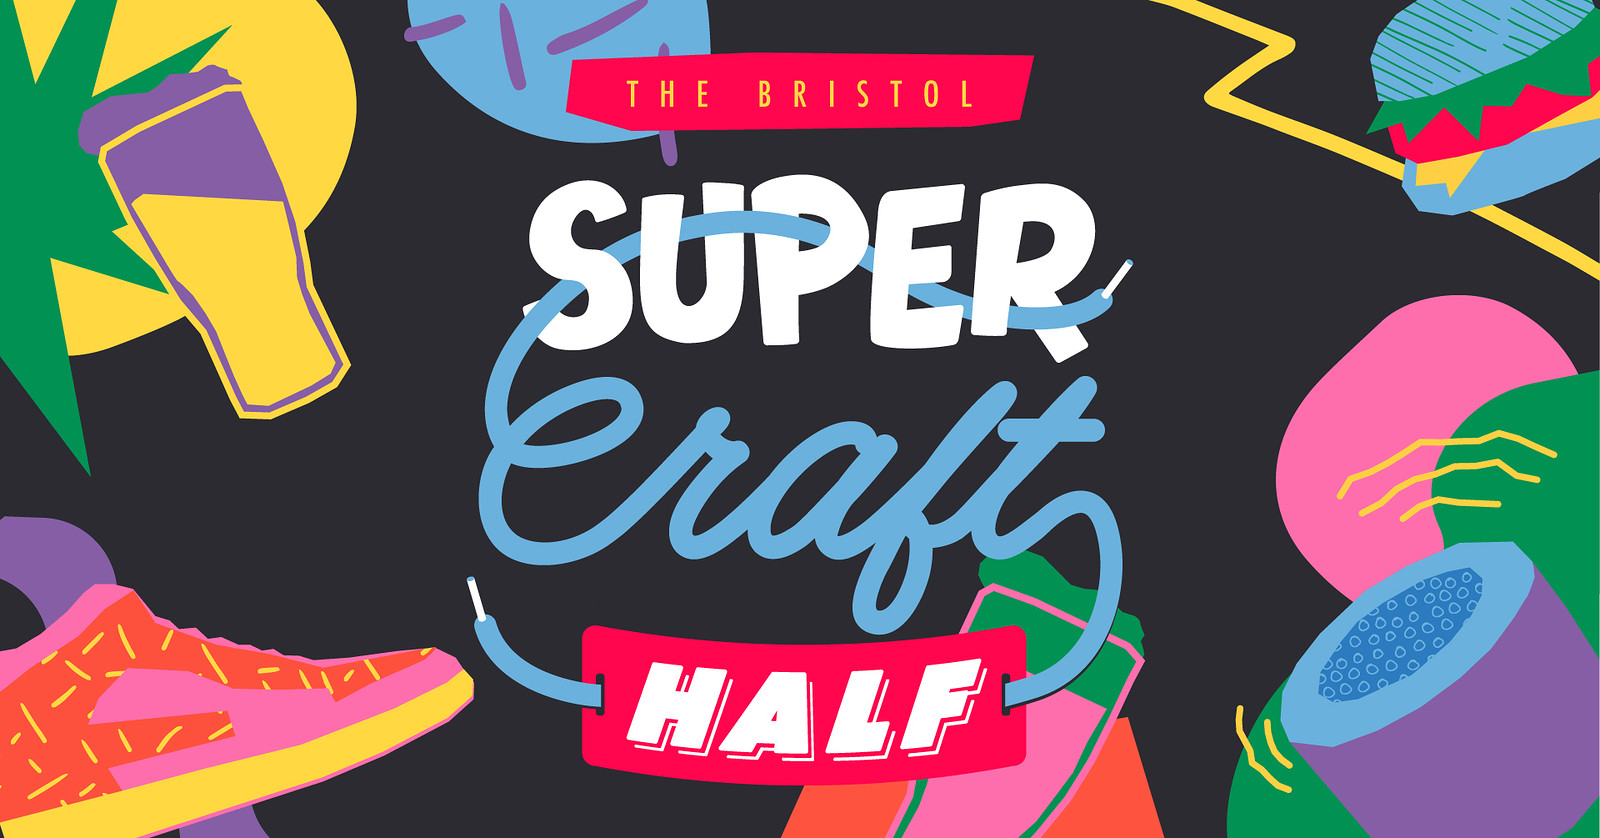 The Bristol Super Craft Half - Day Party at Moor Beer Brewery/Left Handed Giant